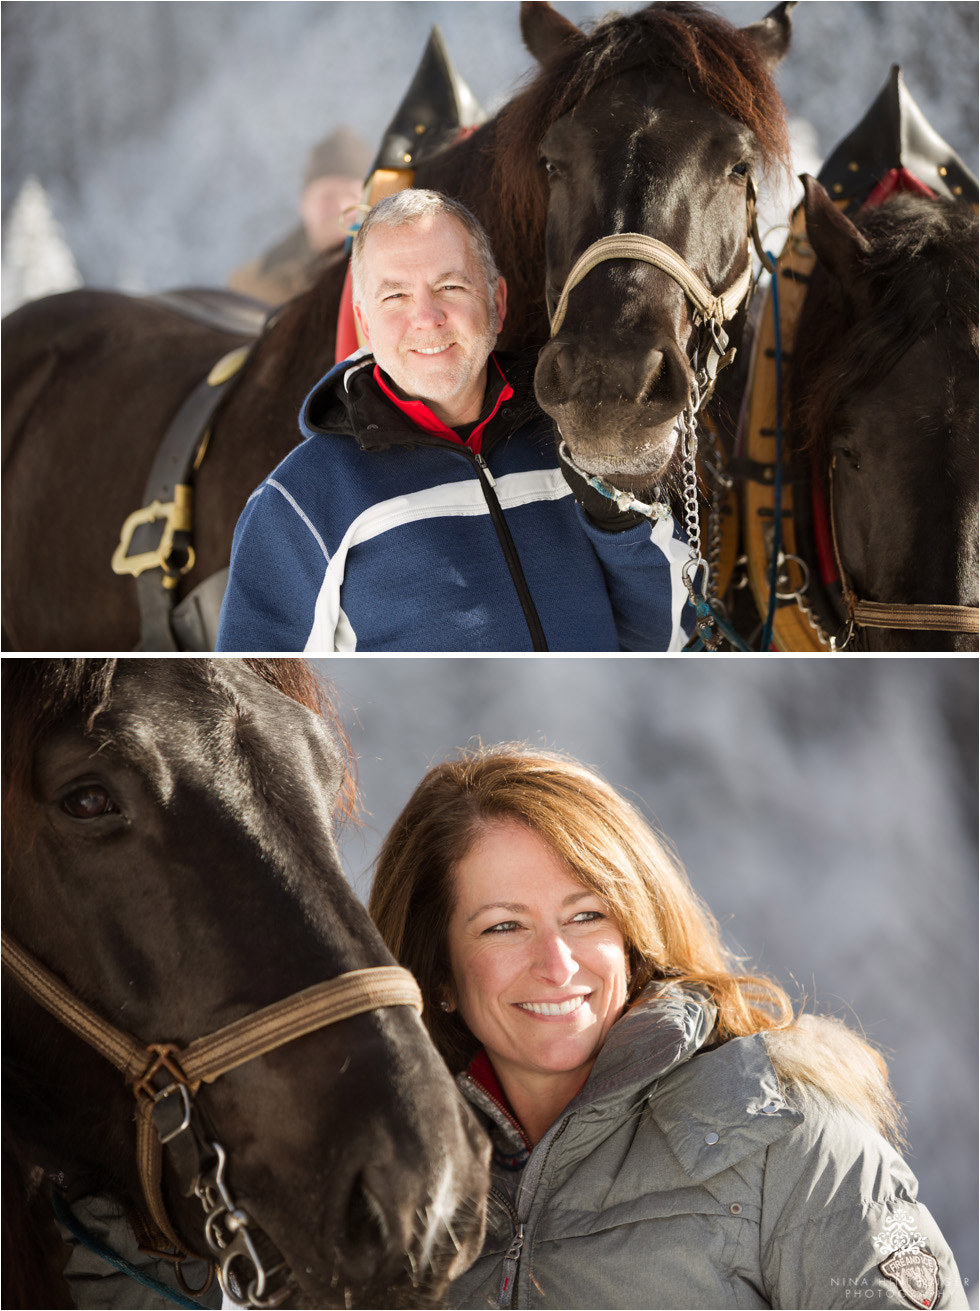 lovely couple with horses during a sleigh ride in st. anton am arlberg - Blog of Nina Hintringer Photography - Wedding Photography, Wedding Reportage and Destination Weddings